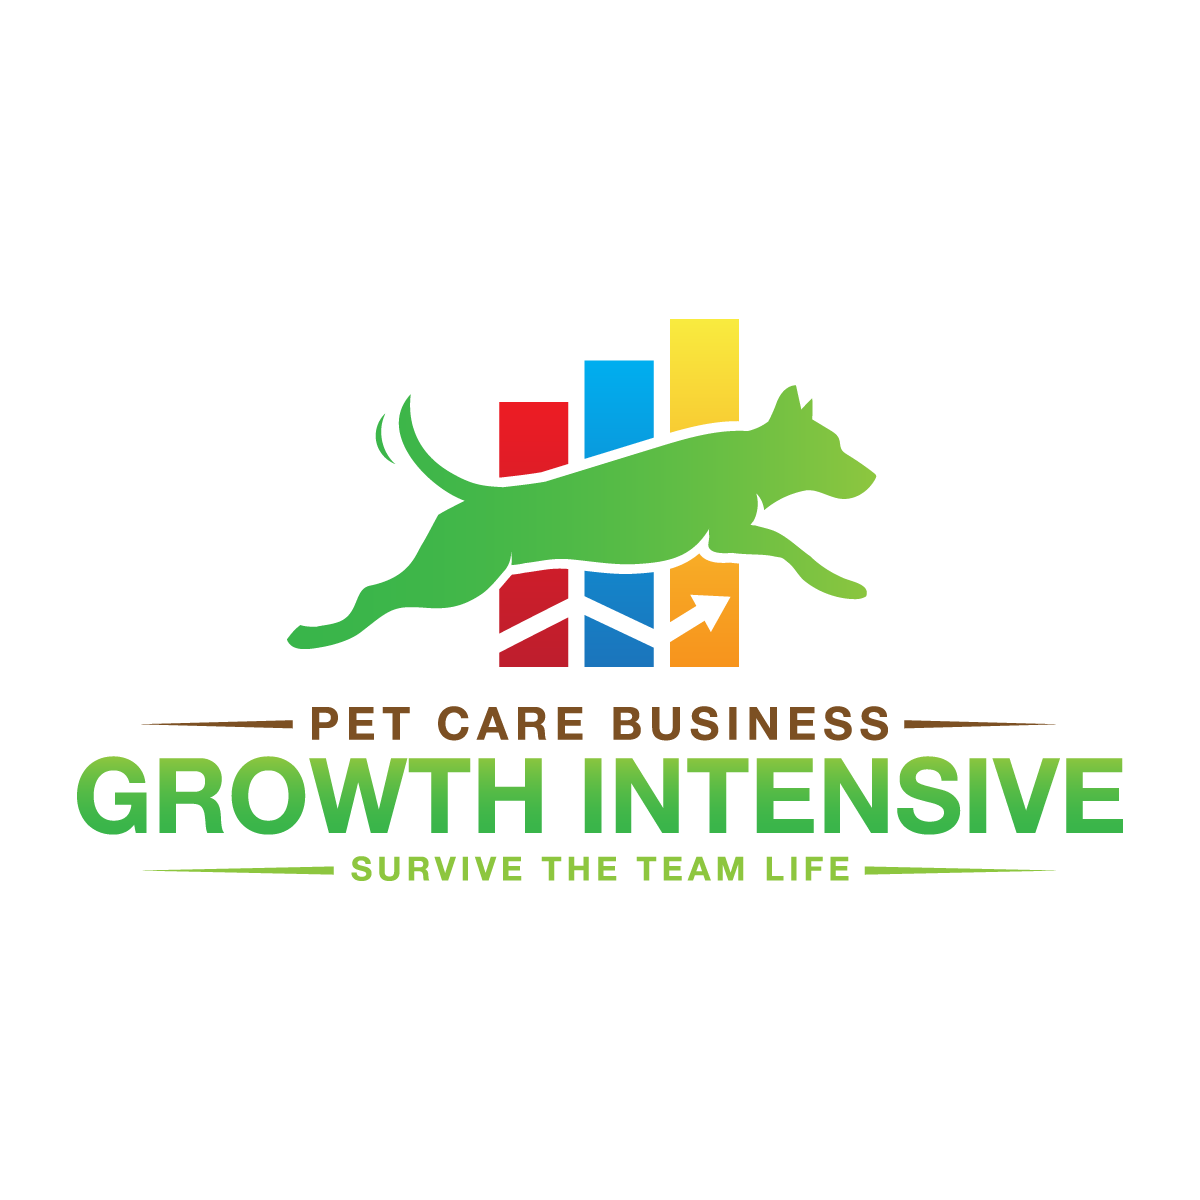 Pet Care Business Growth Intensive Logo